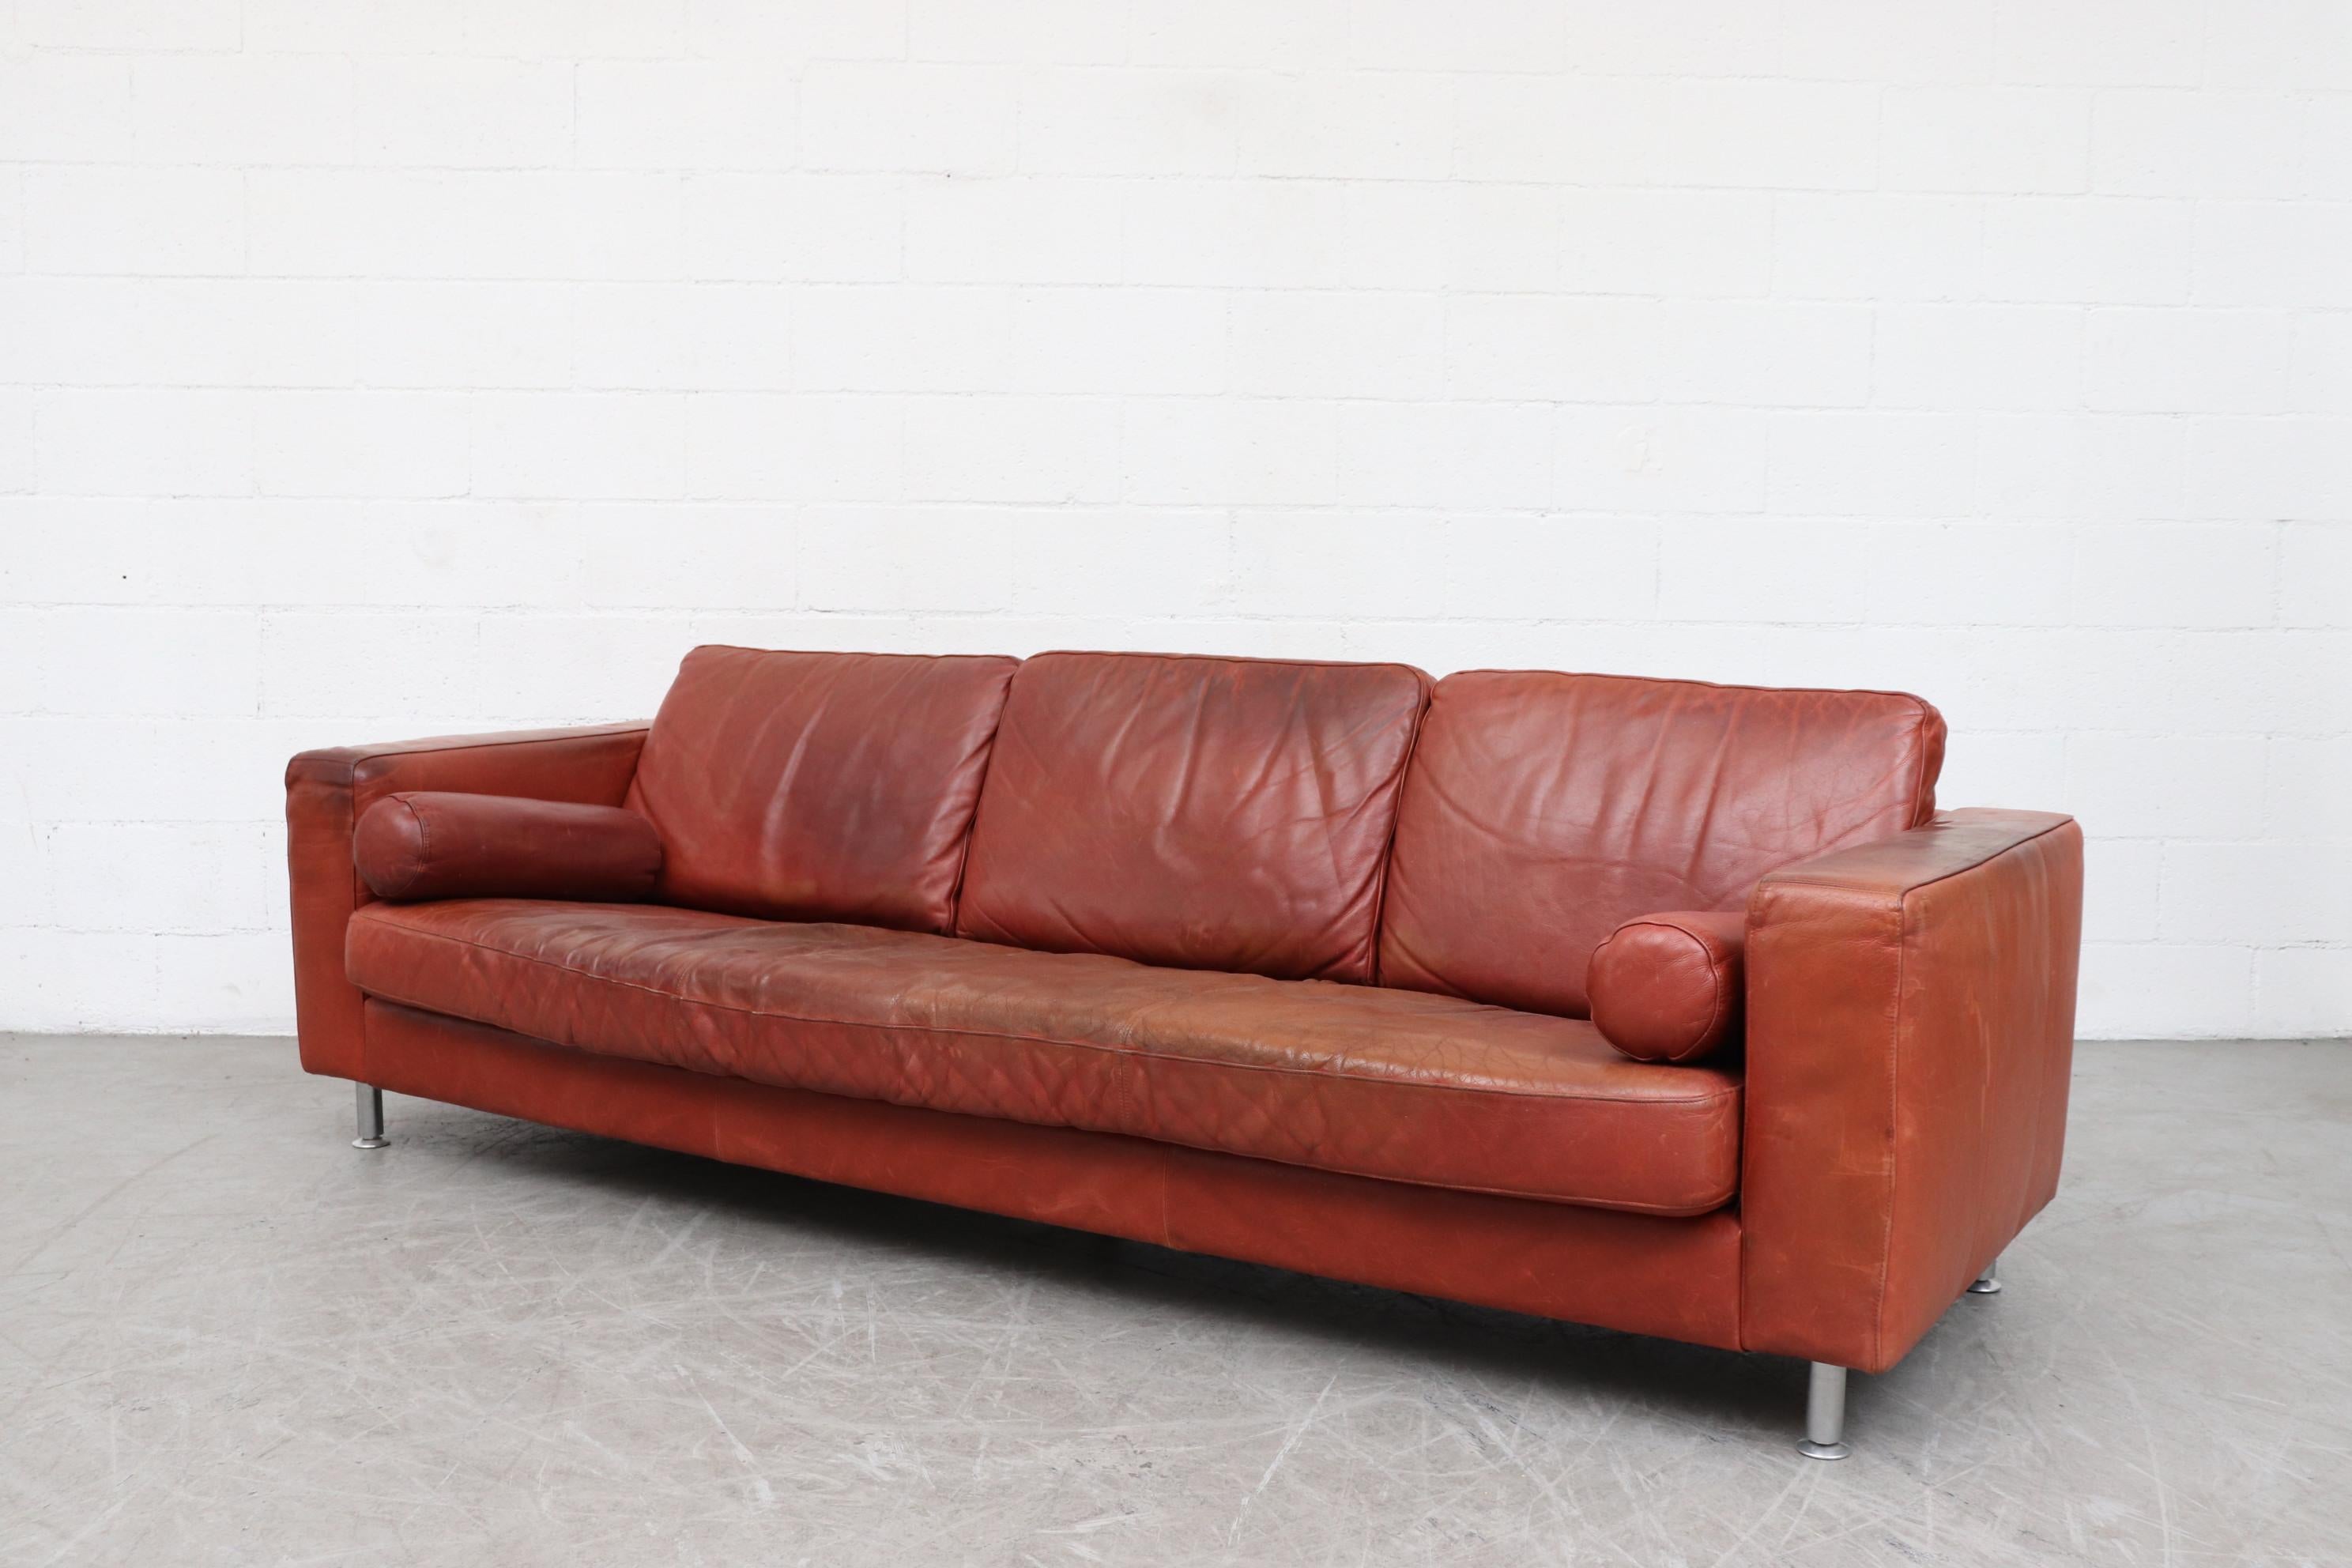 Handsome extra long Knoll style streamline cognac colored leather sofa with 2 bolster pillows and brushed chrome legs, circa 1990. Nice natural patina with visible signs of wear. In very original condition.